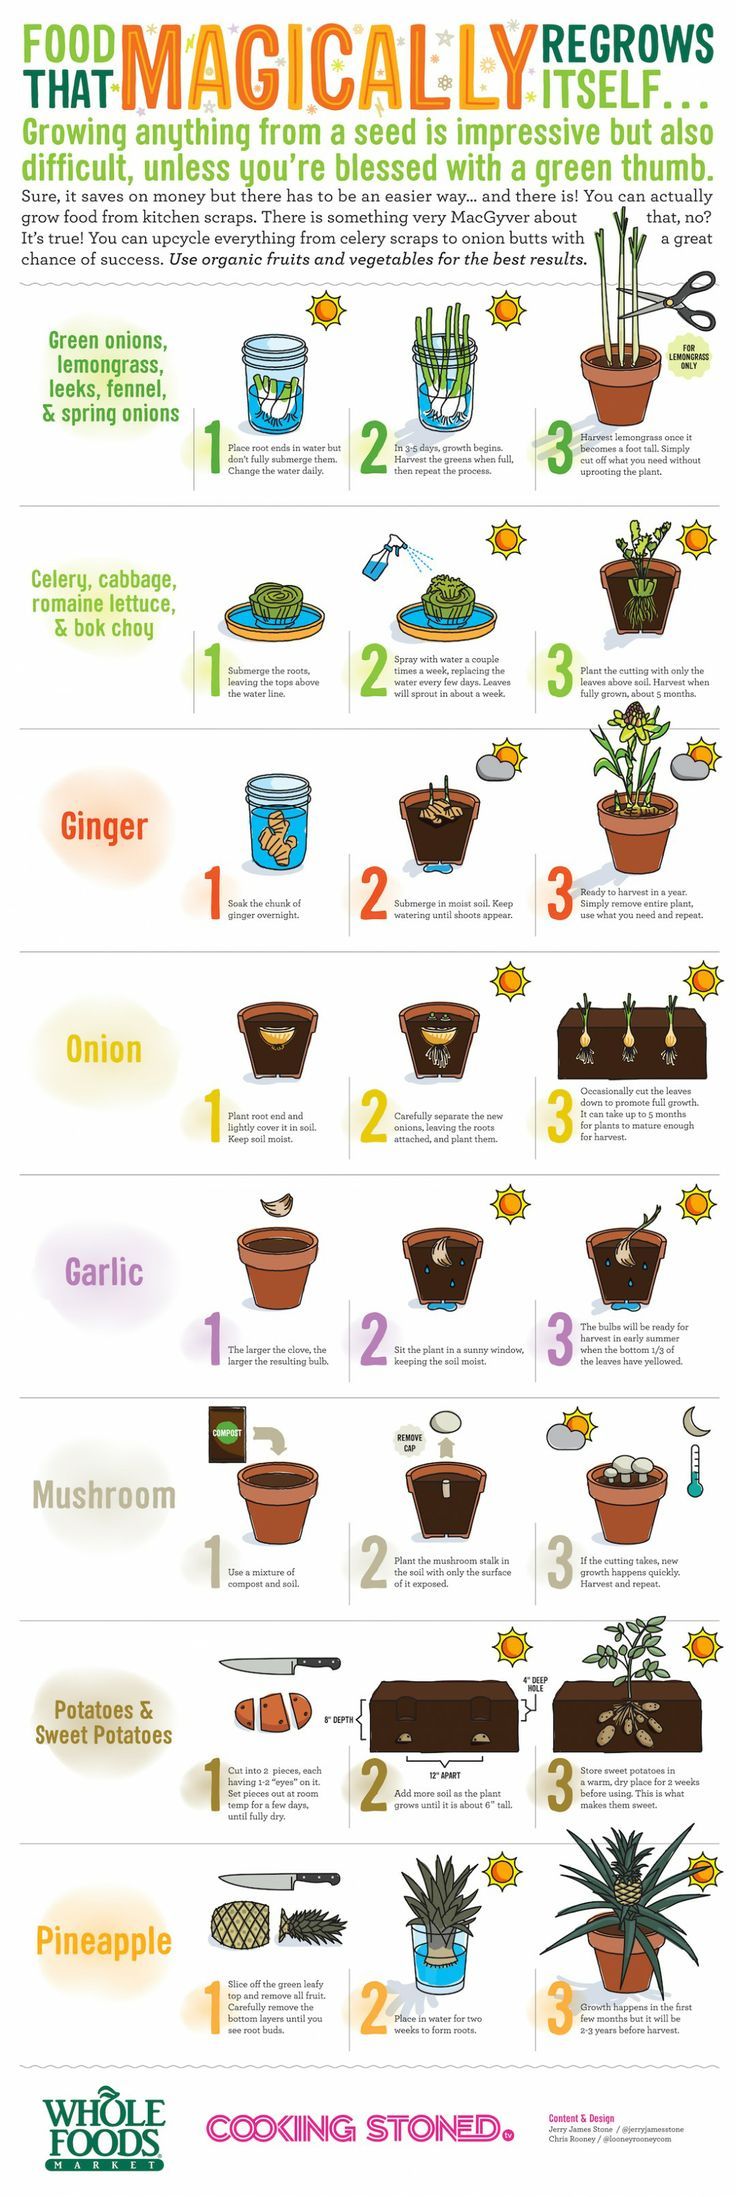 These are 20 clever must save gardening tips & hacks to use in the garden.   How...